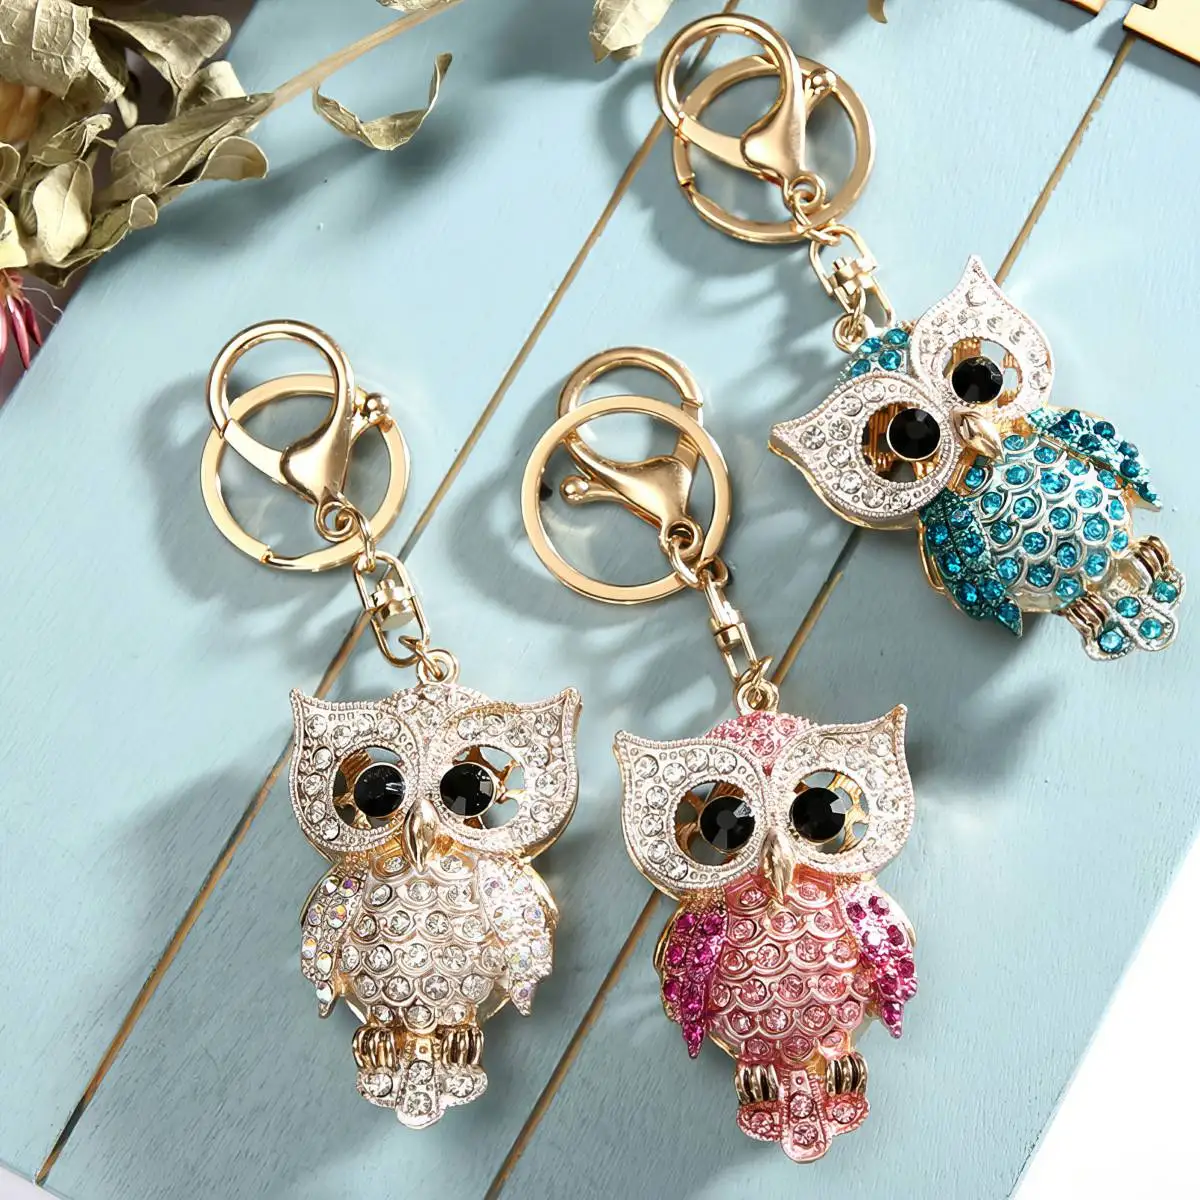 Night Owl Pendant Jewelry Keychain Holder Charms Glitter Keyring Accessories for Cars Bags Women Girl Gift BA3-00700